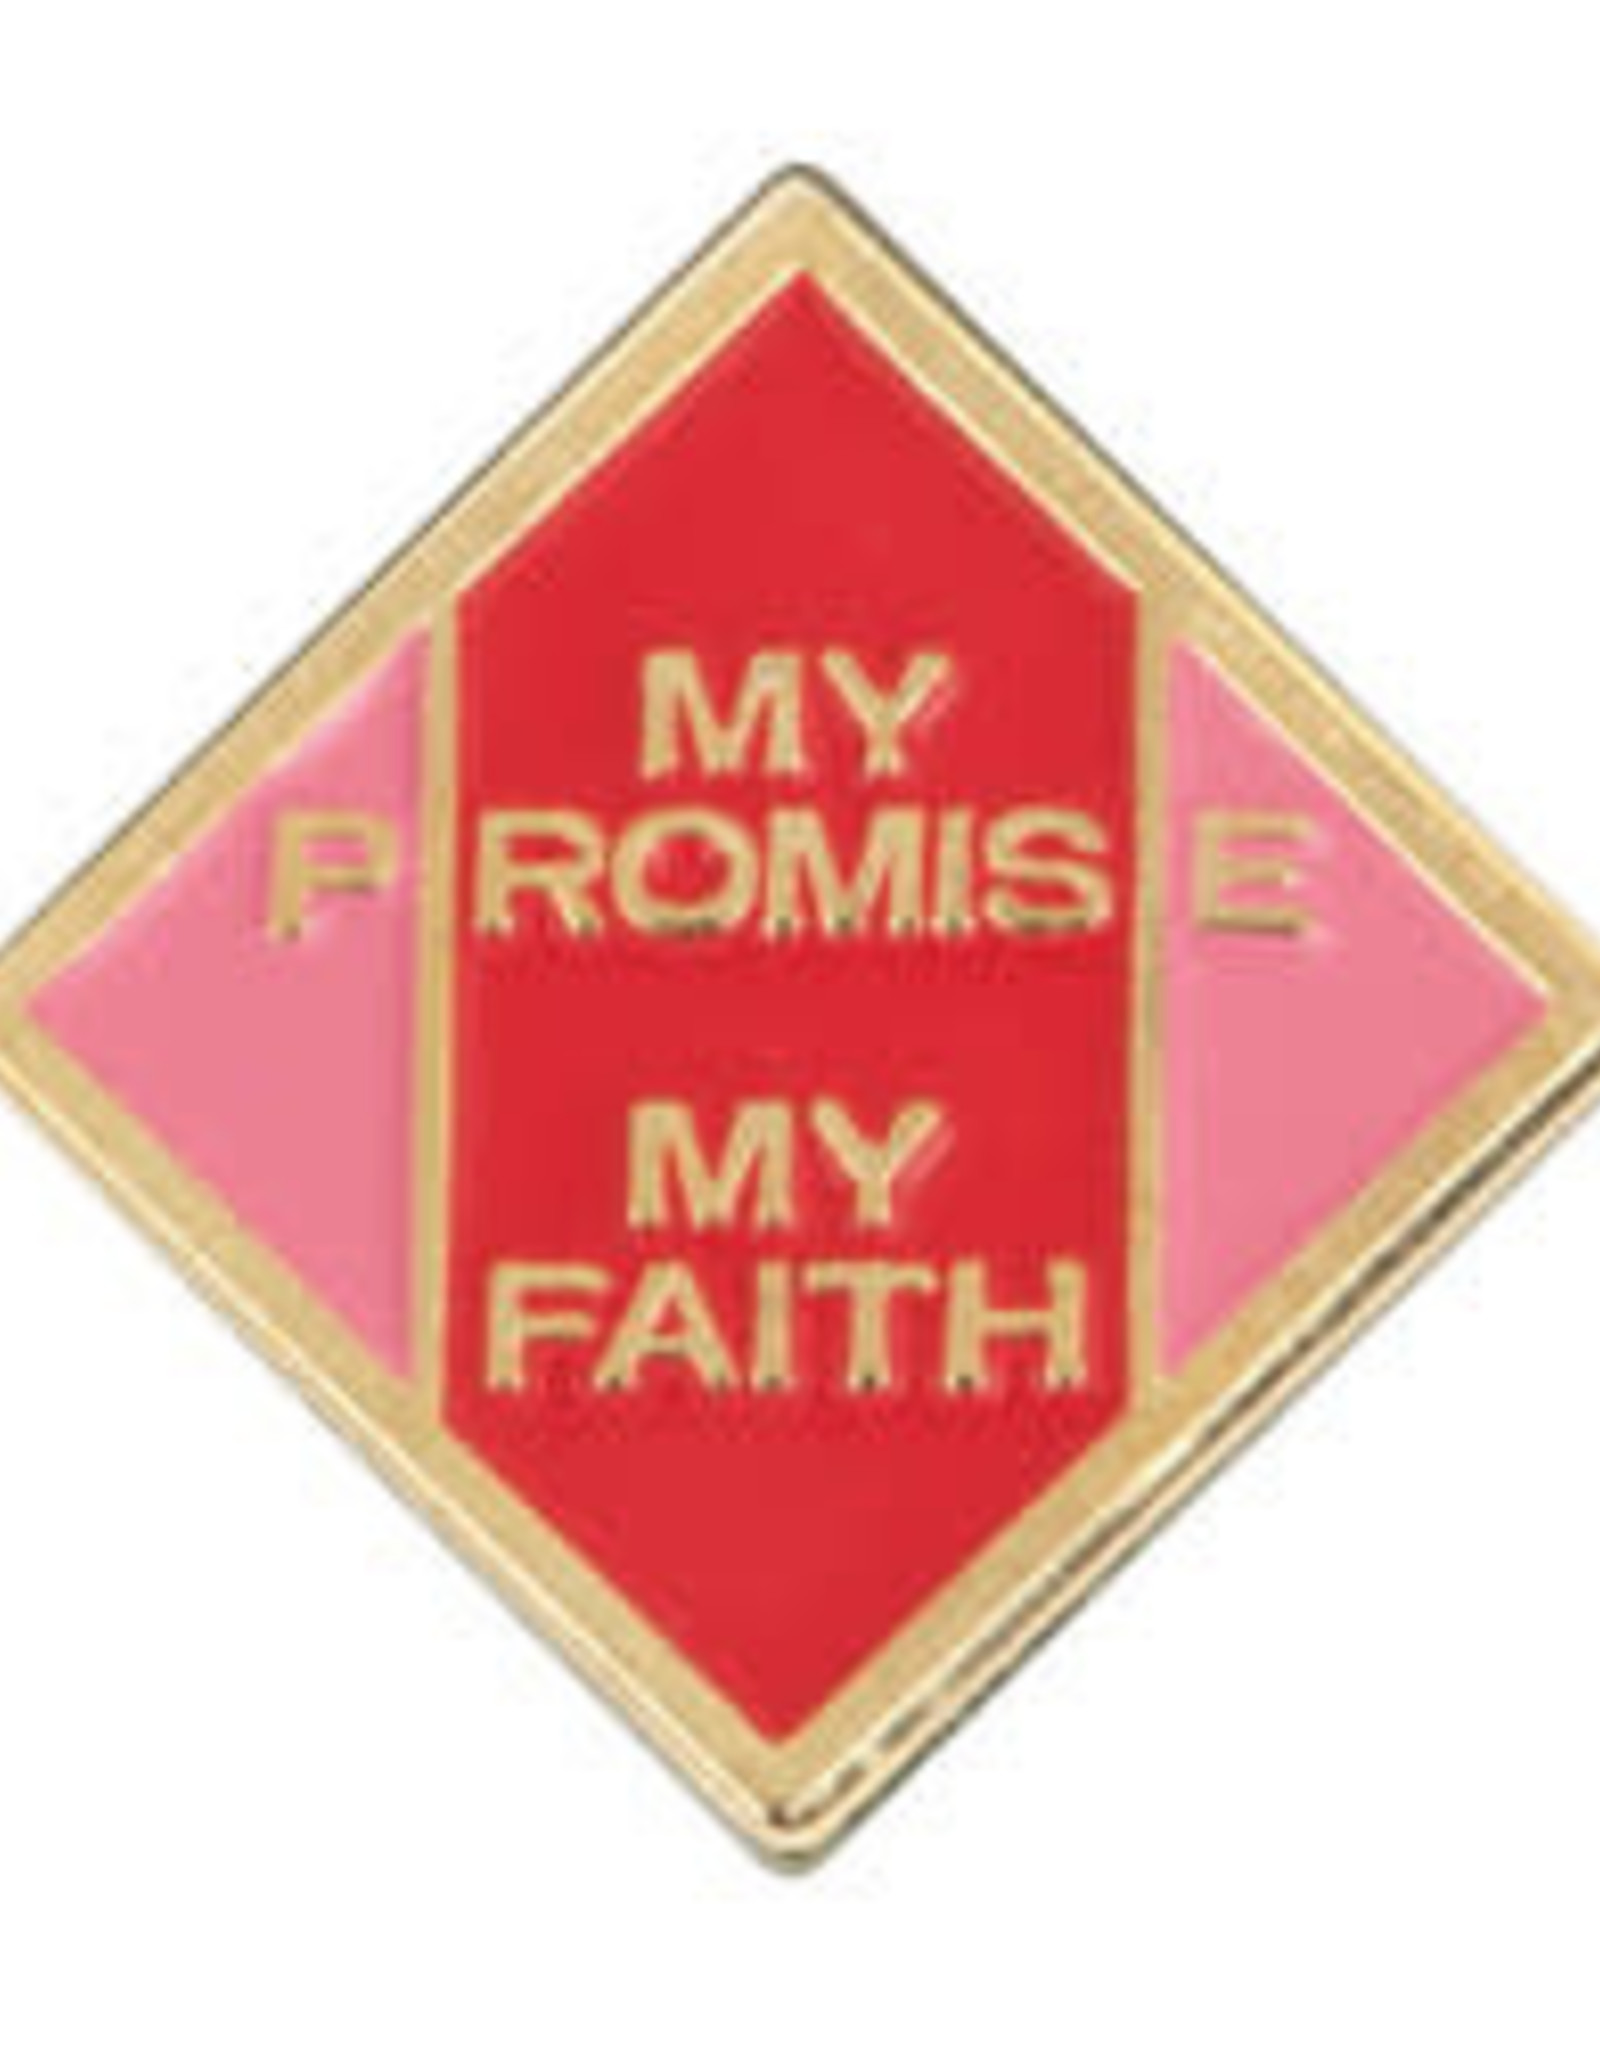 GIRL SCOUTS OF THE USA Cadette My Promise/Faith Pin 3